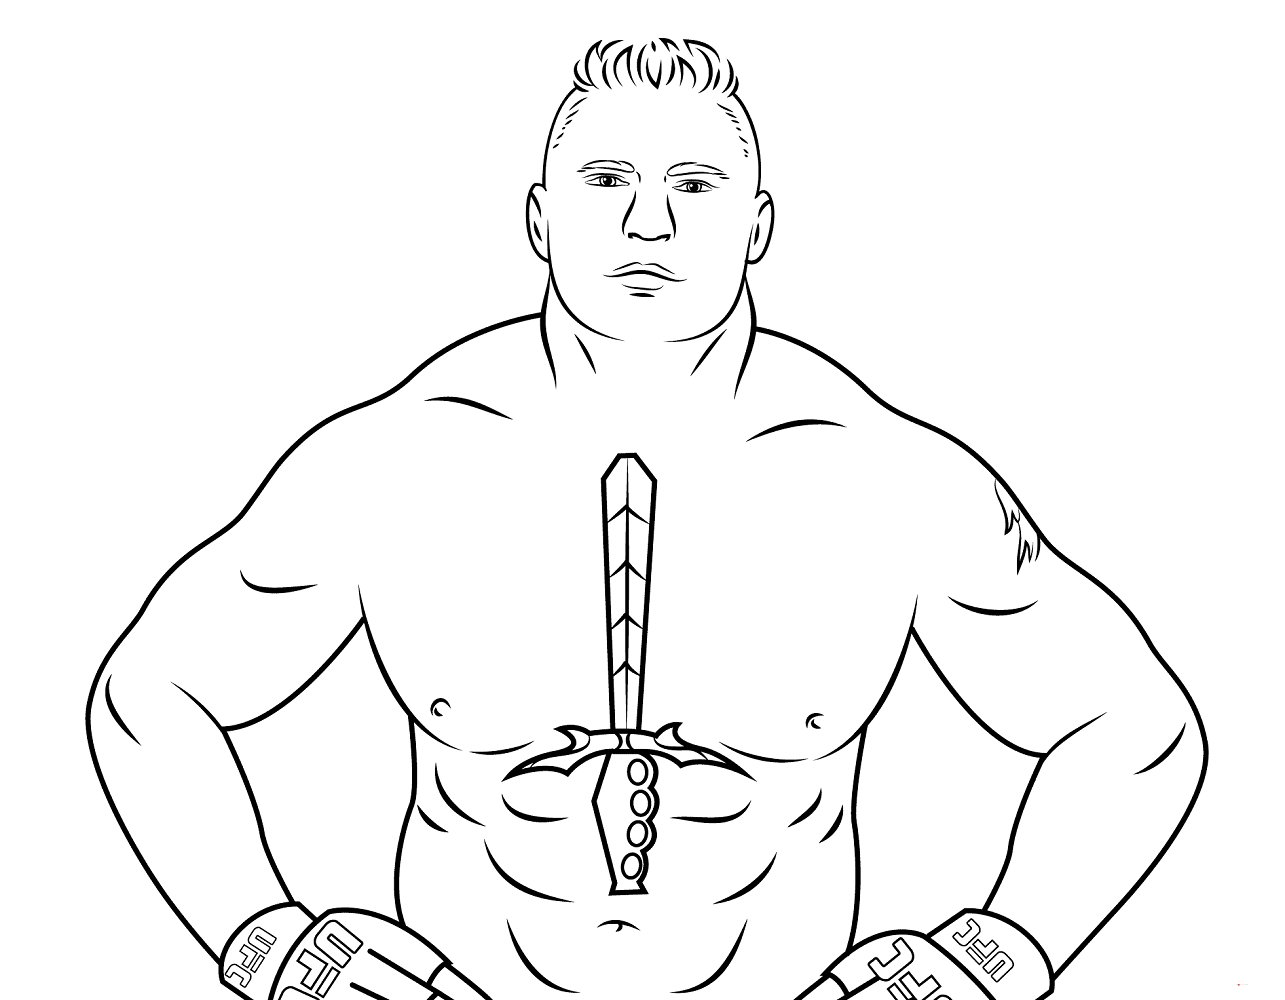 Free printable world wrestling entertainment or wwe coloring pages